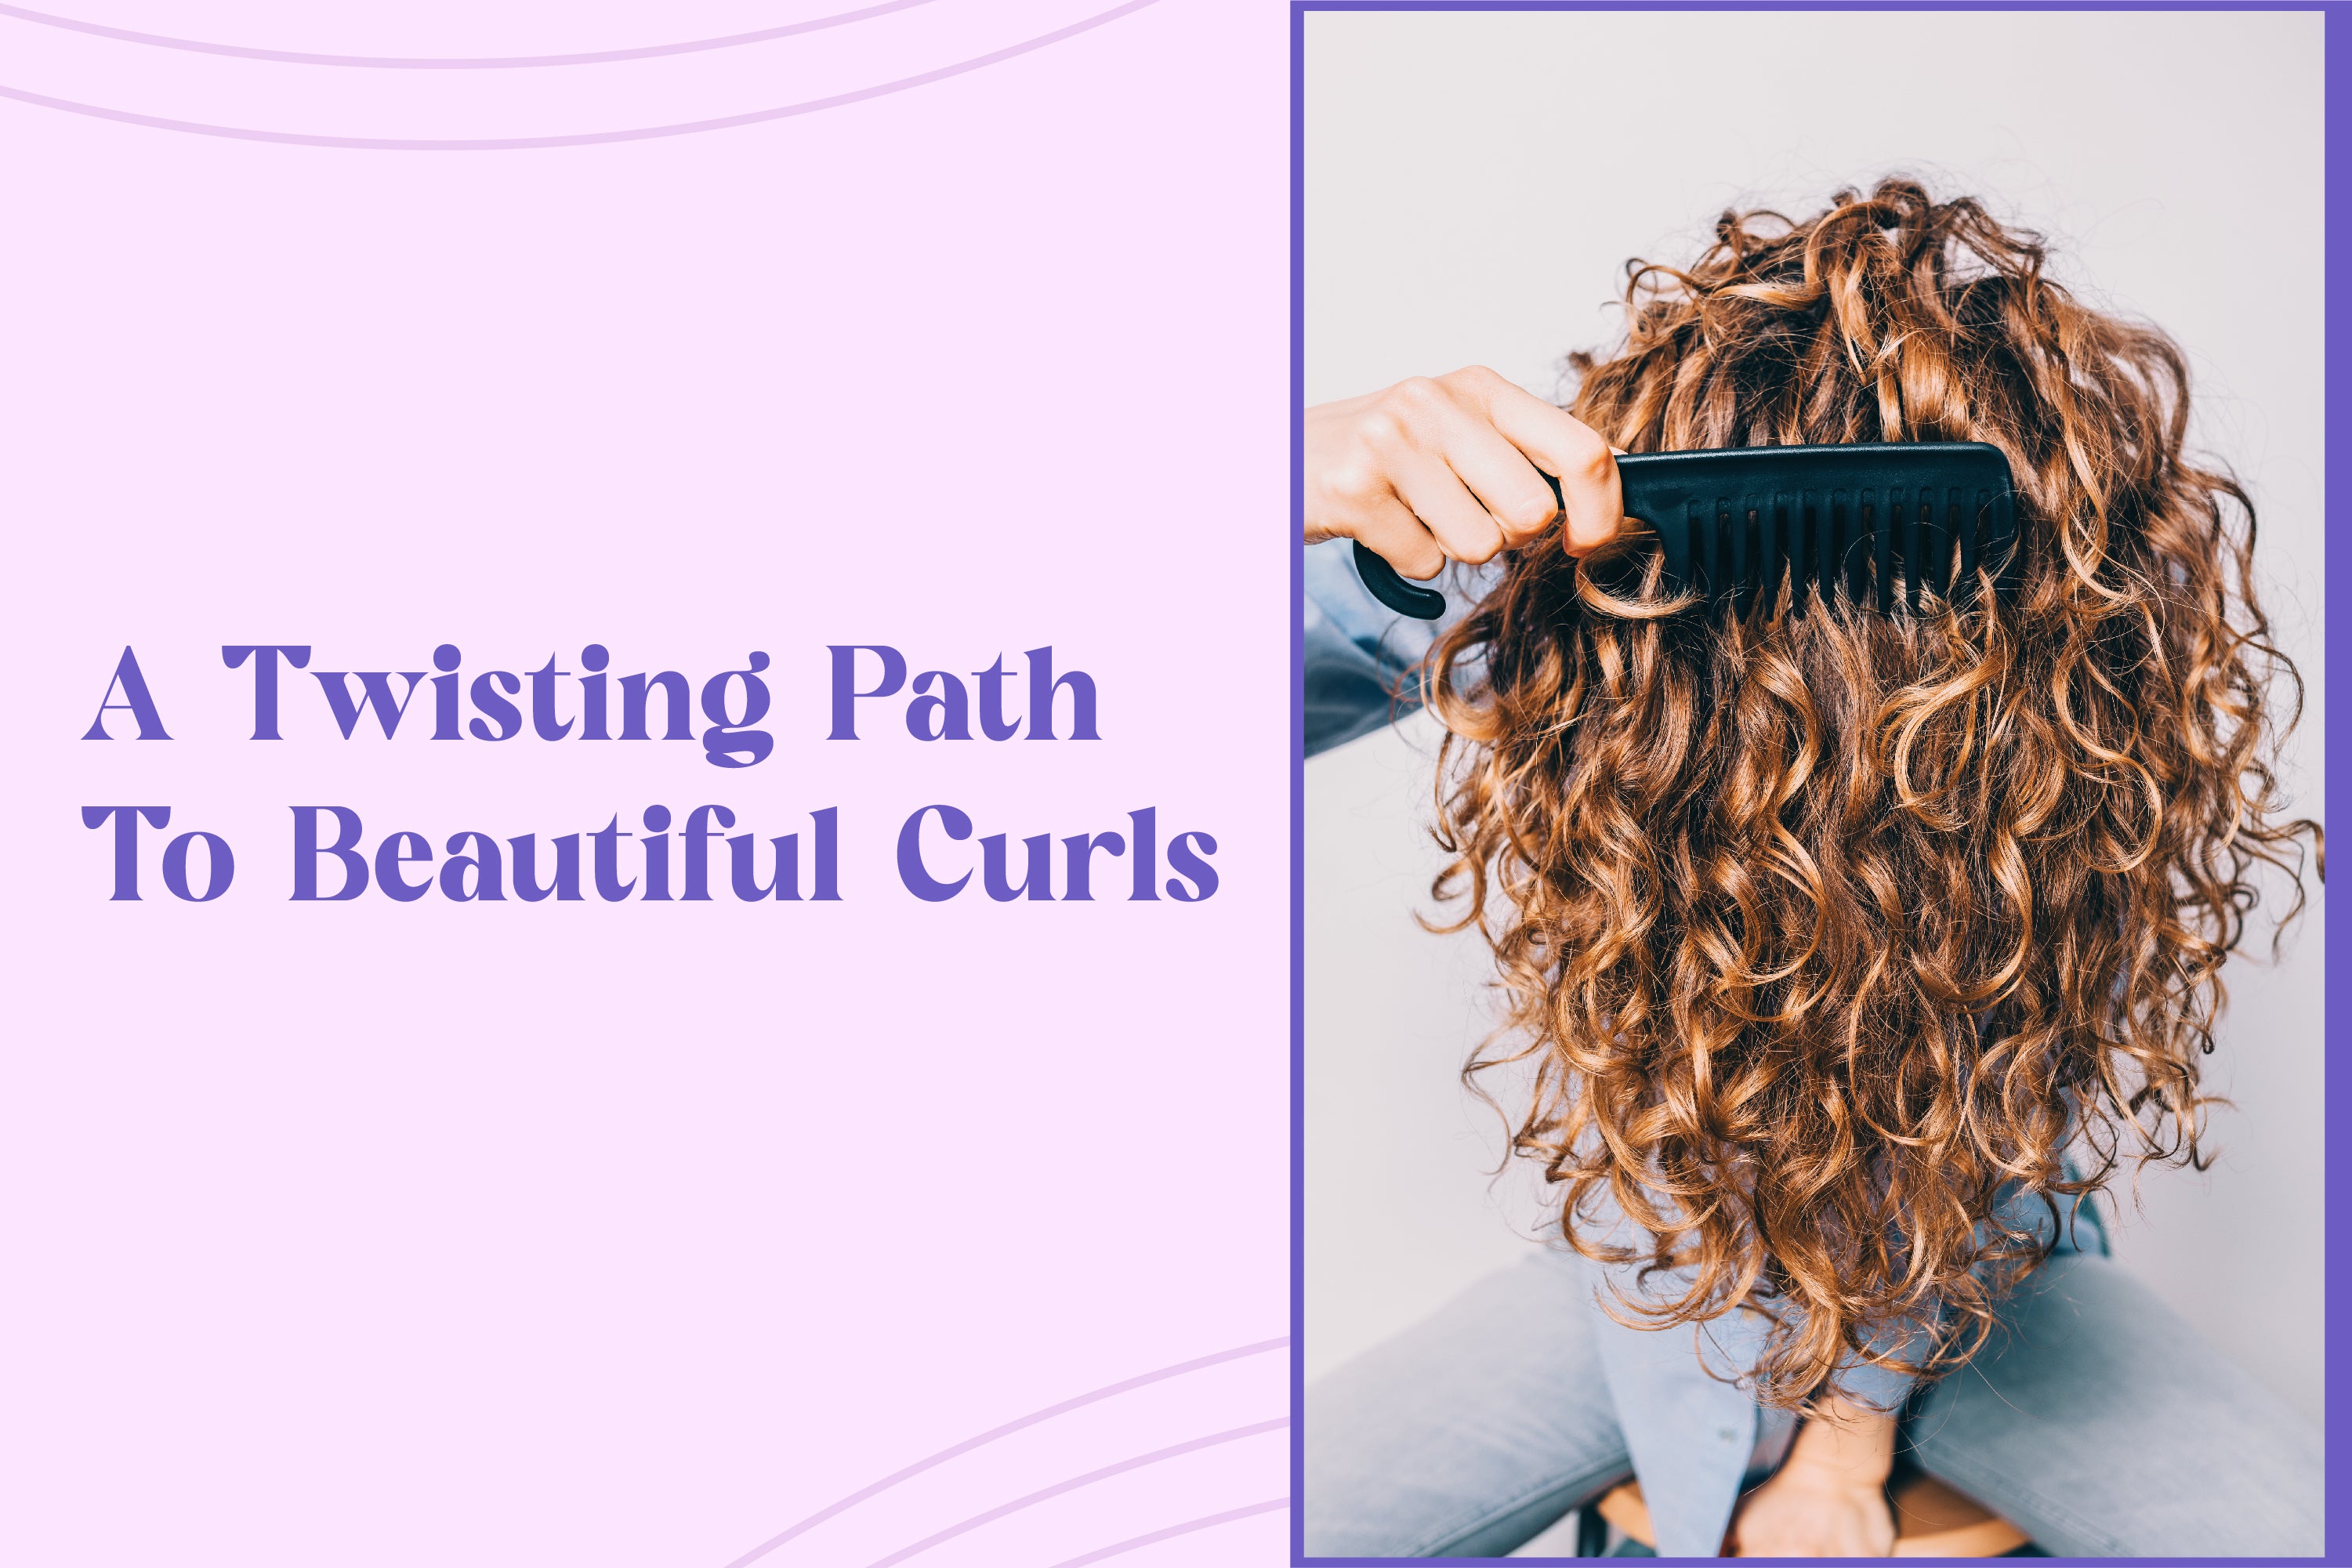 Curls can come in many different shapes. This spiral curly hair